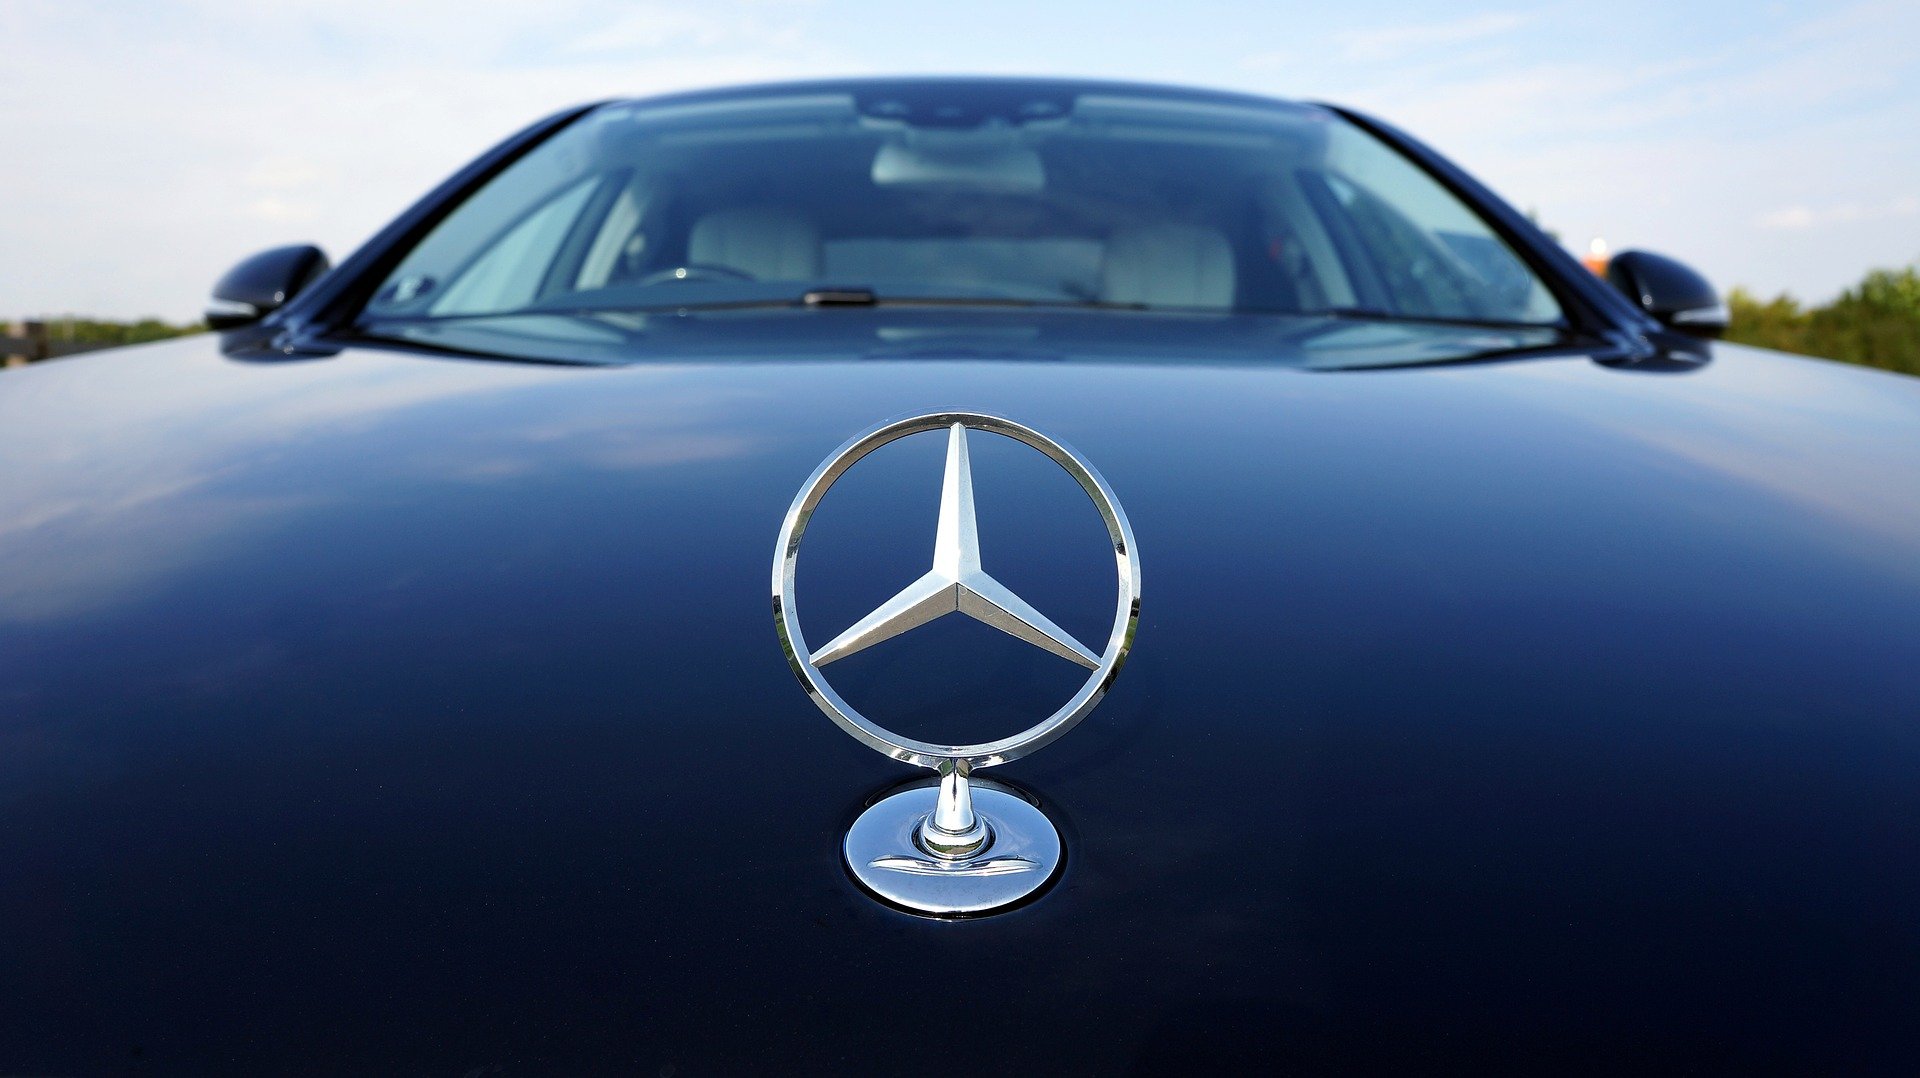 The taxi car had a Mercedes Benz hood ornament. | Photo: Pixabay/Mikes-Photography